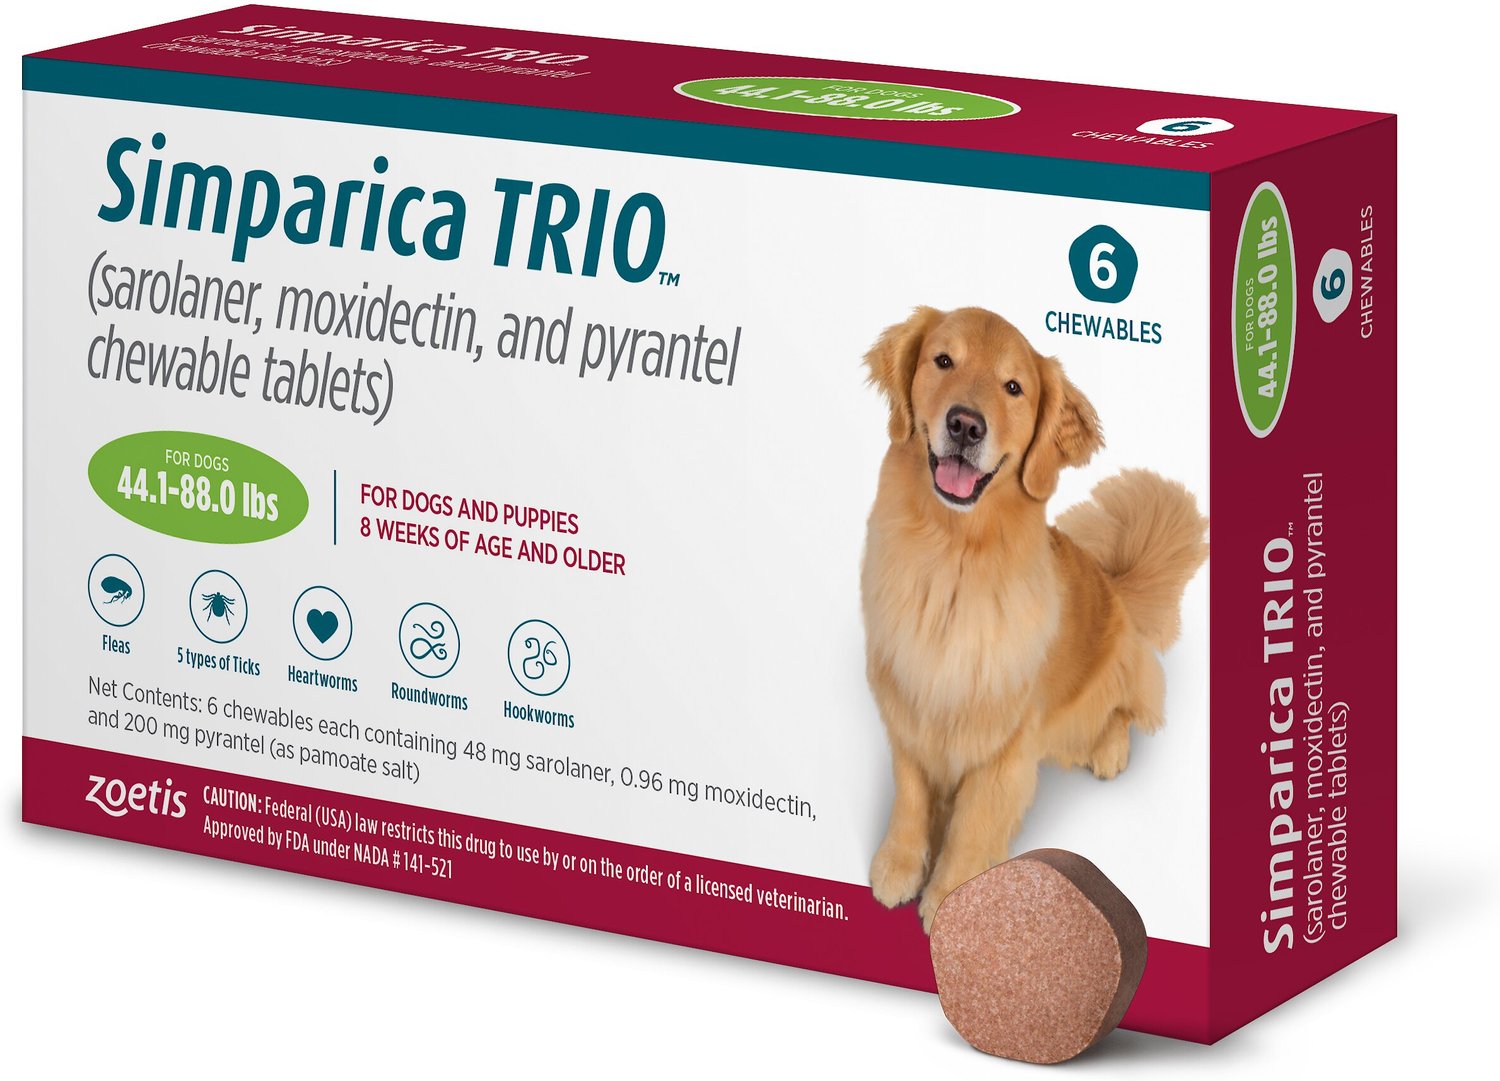 simparica flea and tick medication for dogs